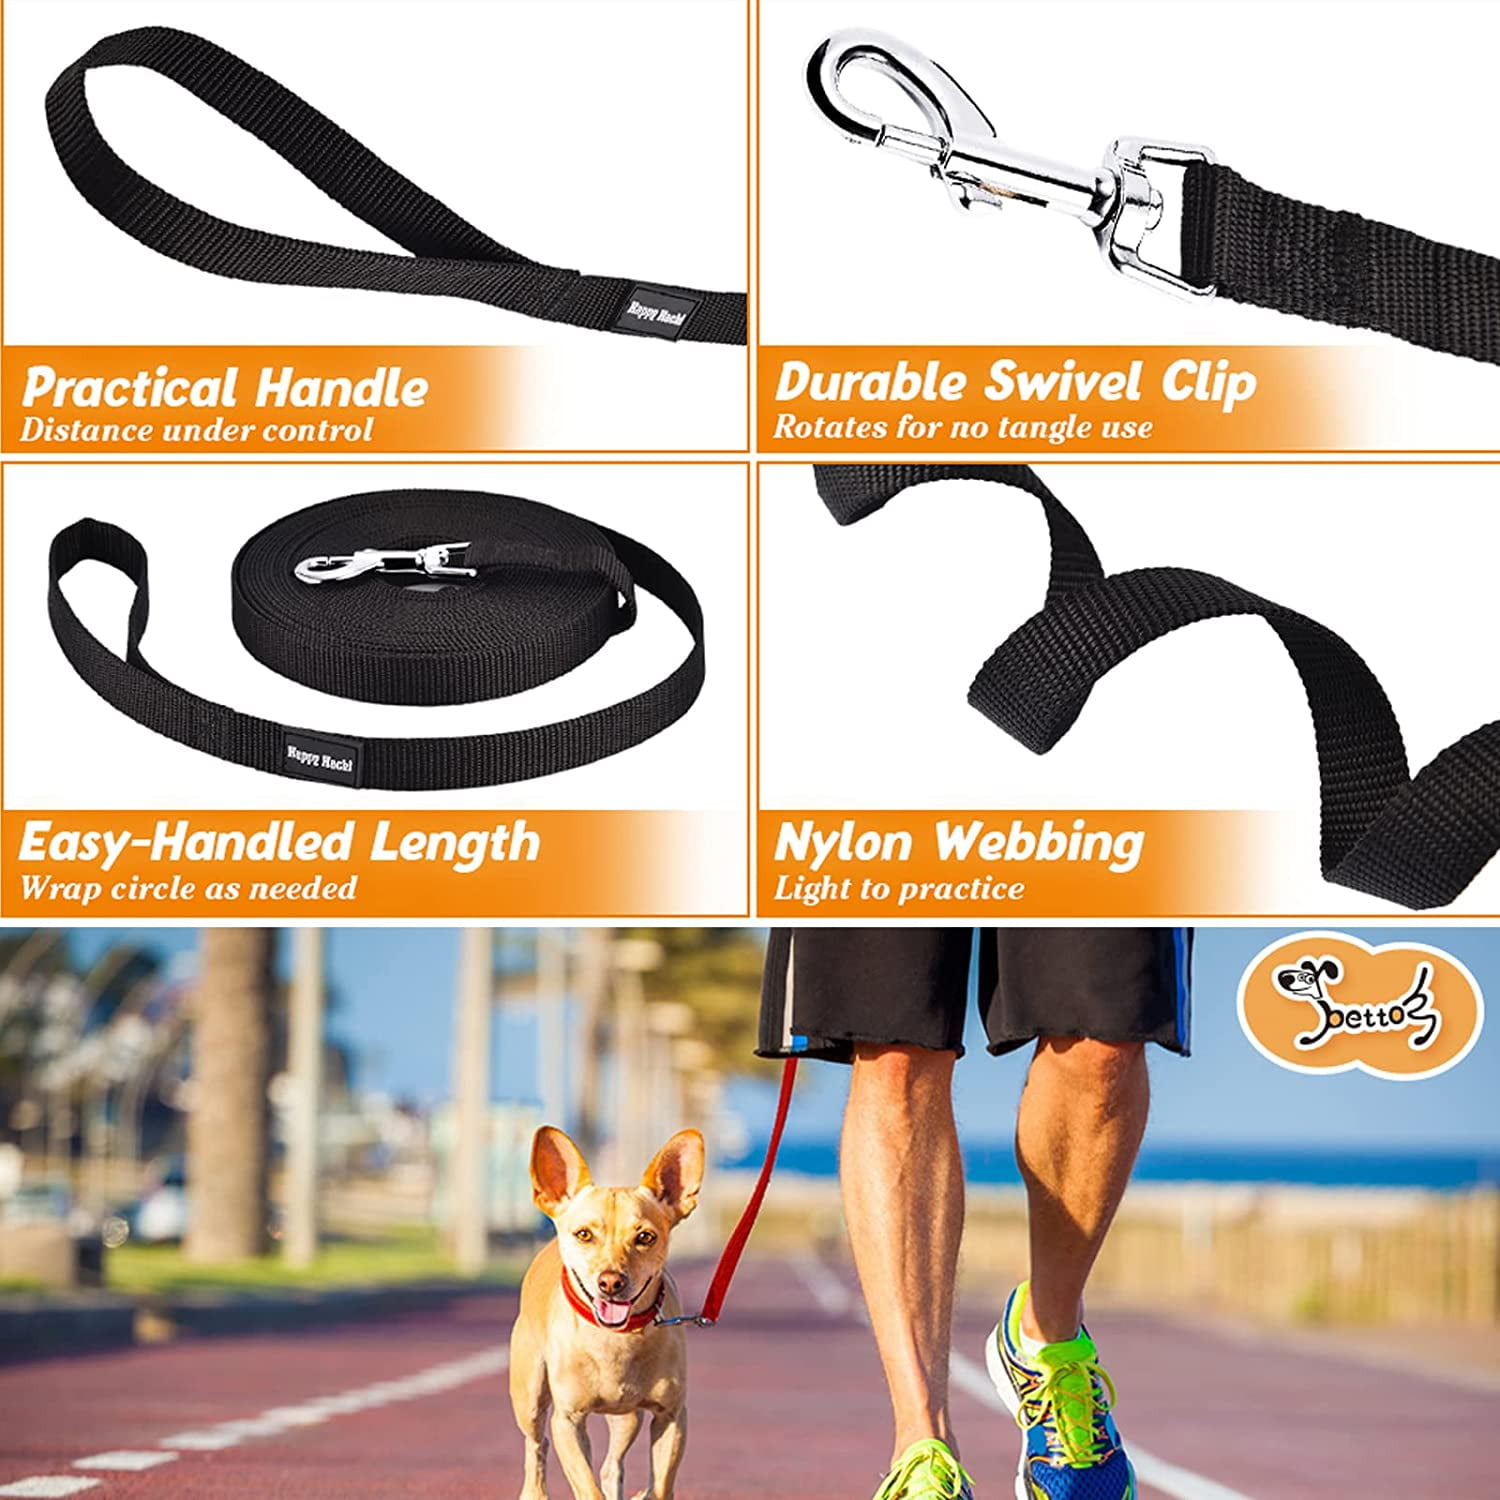 High Visibility Climbing Strength Rope Leash Check Cord Dog Recall Training Leash Wander Heavy Duty 30 Foot Long Dog Leash Nickel Plated Swivel Clasp/Clip Provides for Tangle Free Use 